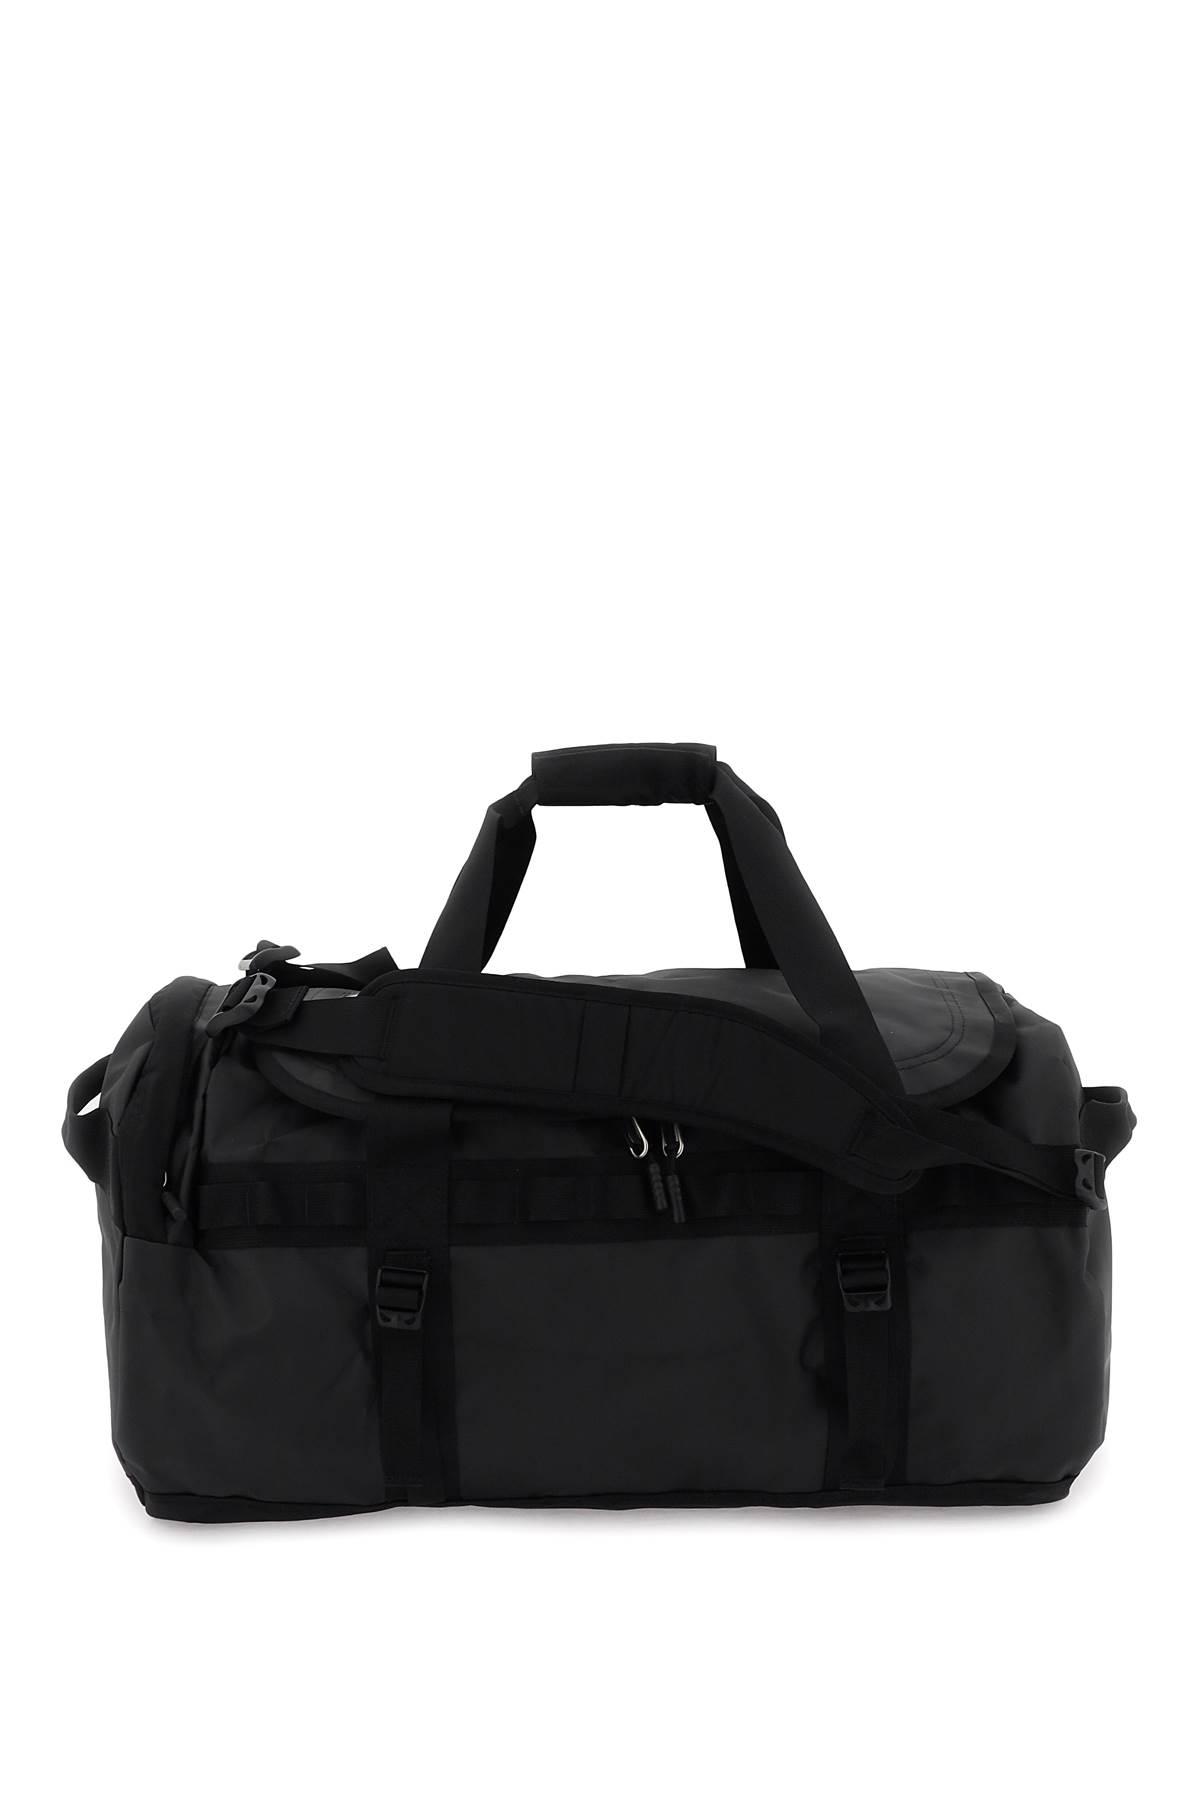 The North Face Base Camp Duffel Bag in Black | Lyst